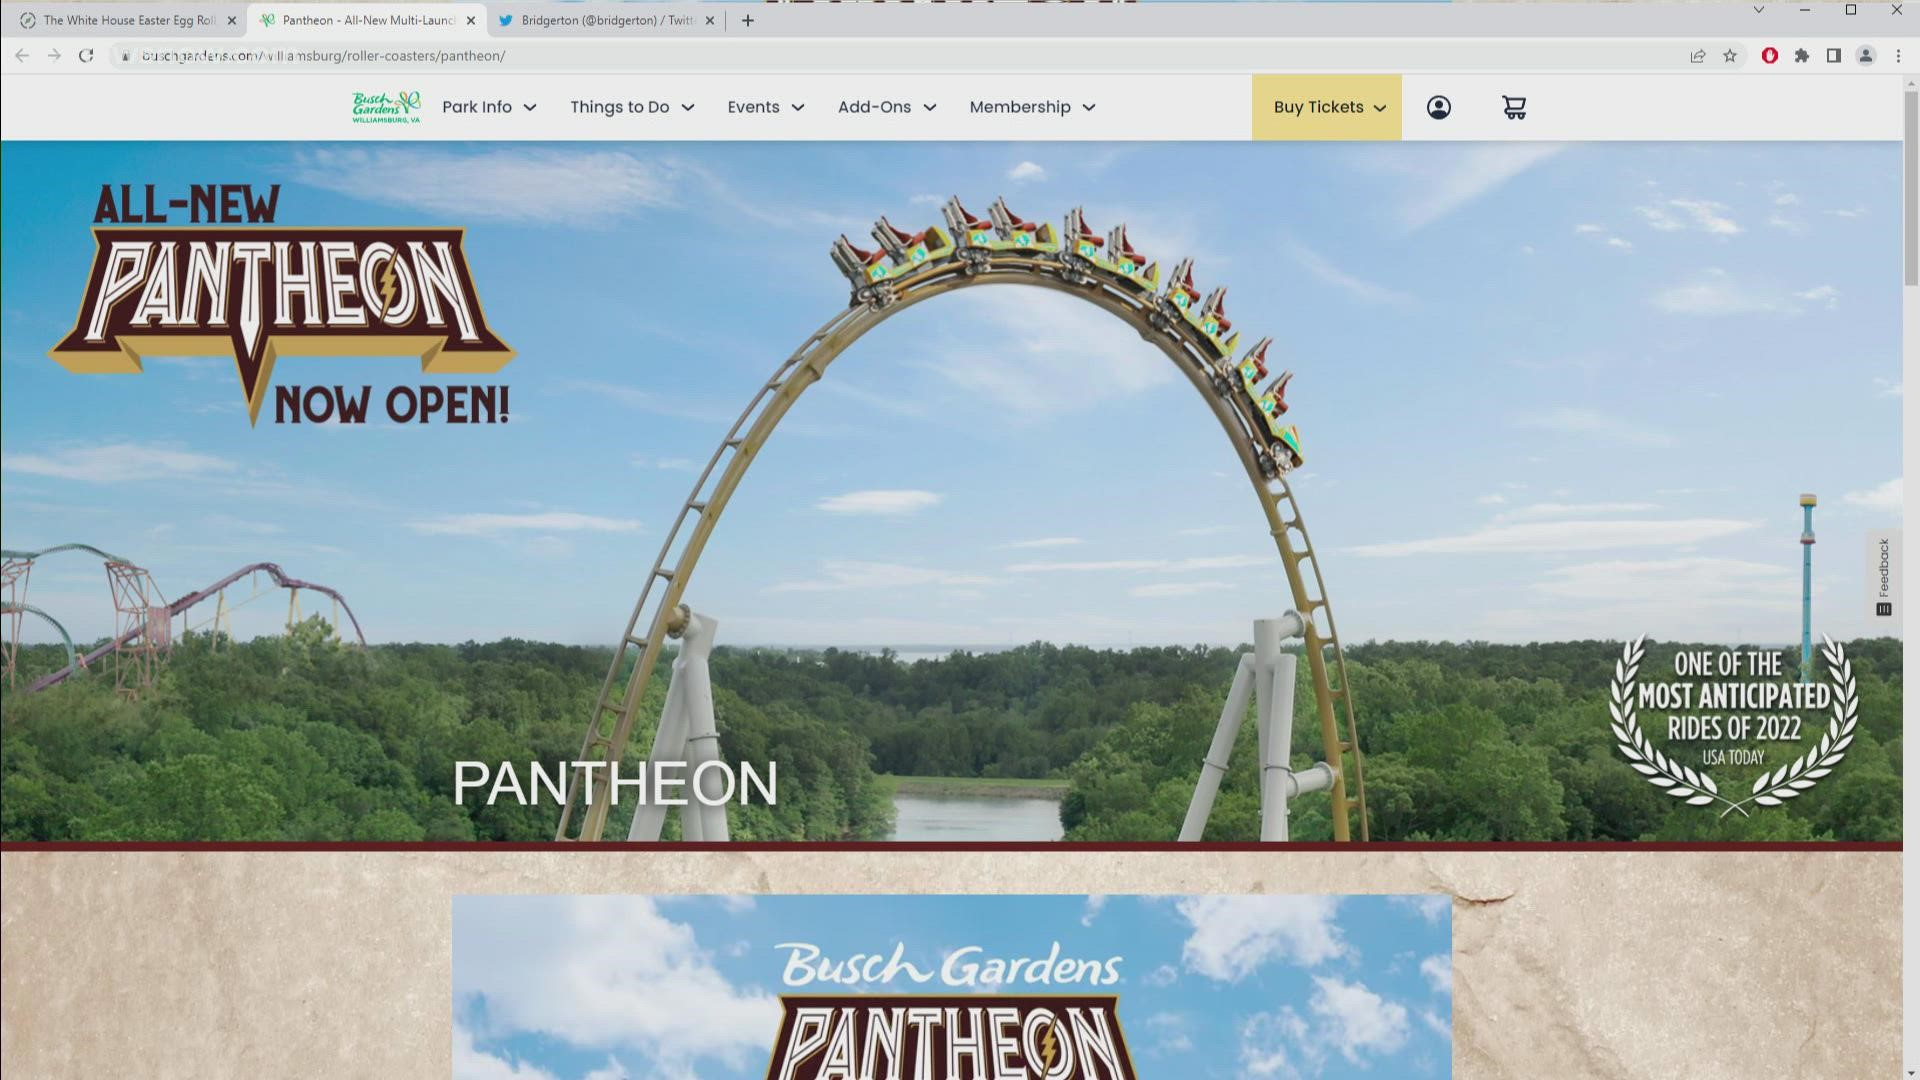 Pantheon, Busch Gardens Williamsburg's newest and most epic roller coaster, is finally open to the public, after a two-year pandemic-driven delay.